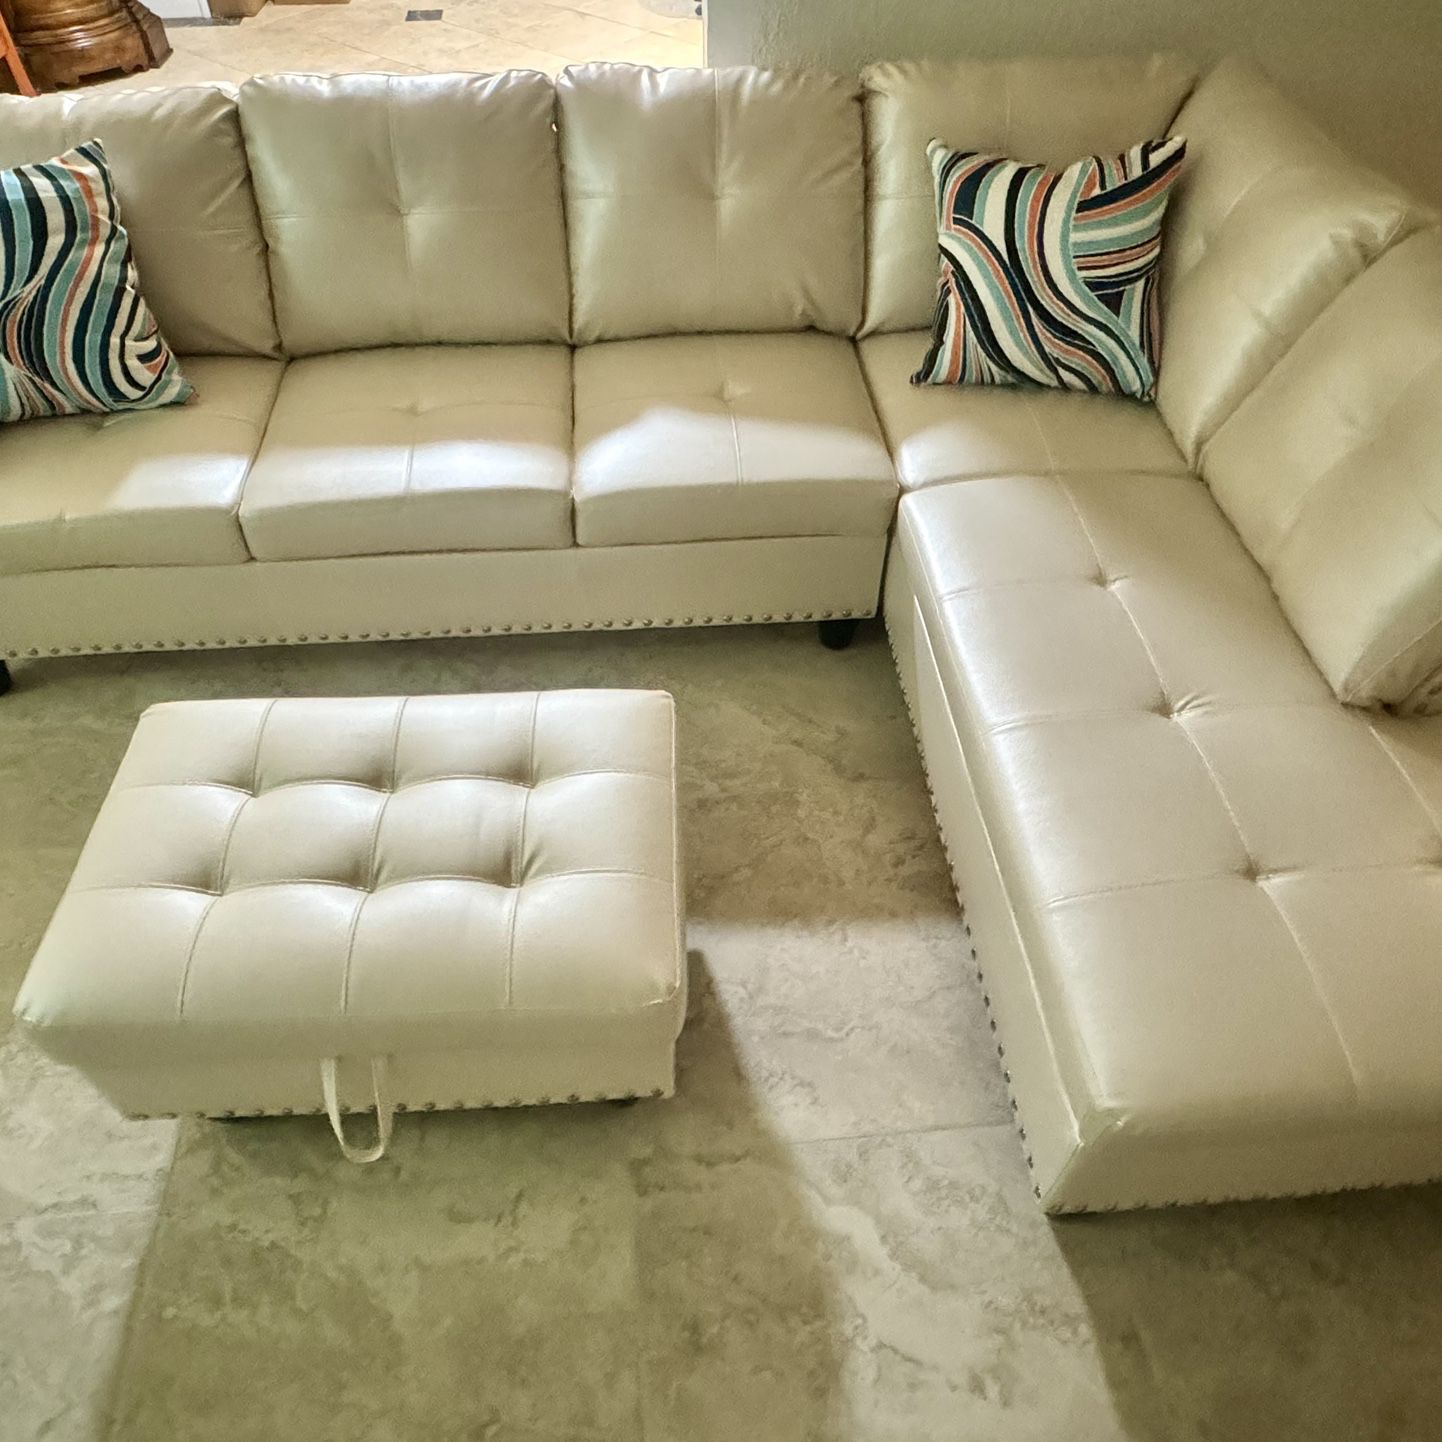 New sectional couch (open box)